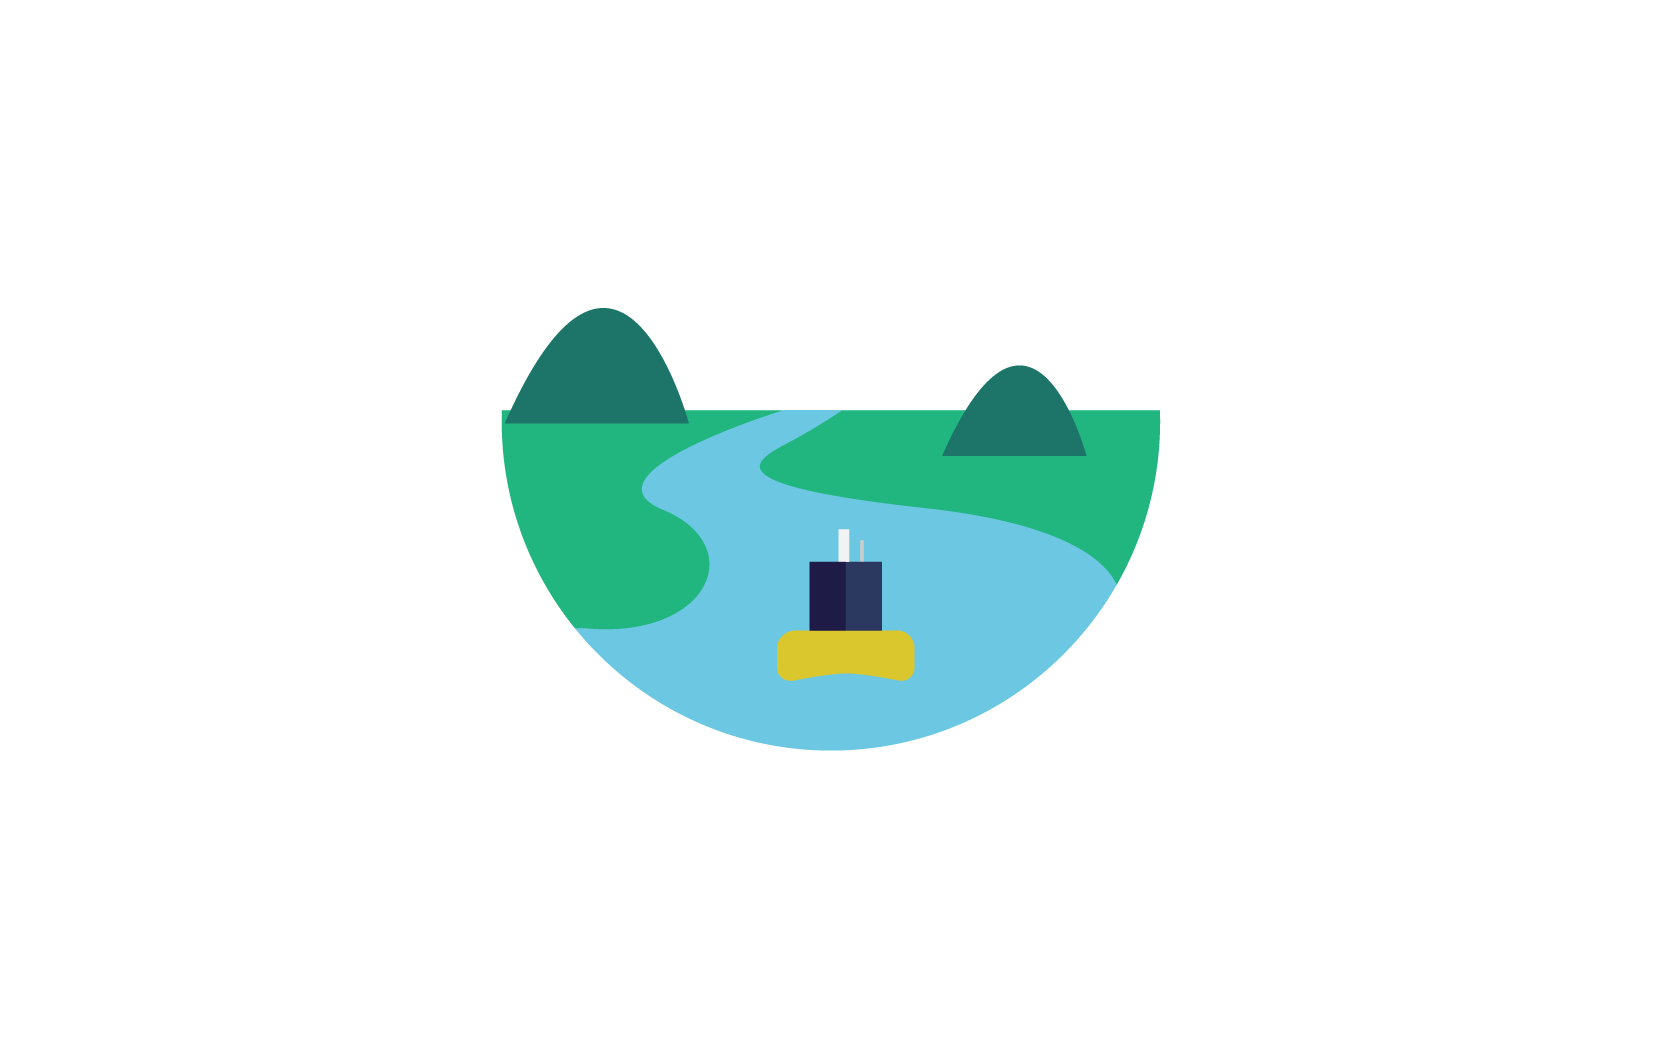 Monocle Logo - Download Monocle Logo With Text - Video Game PNG Image with No ...